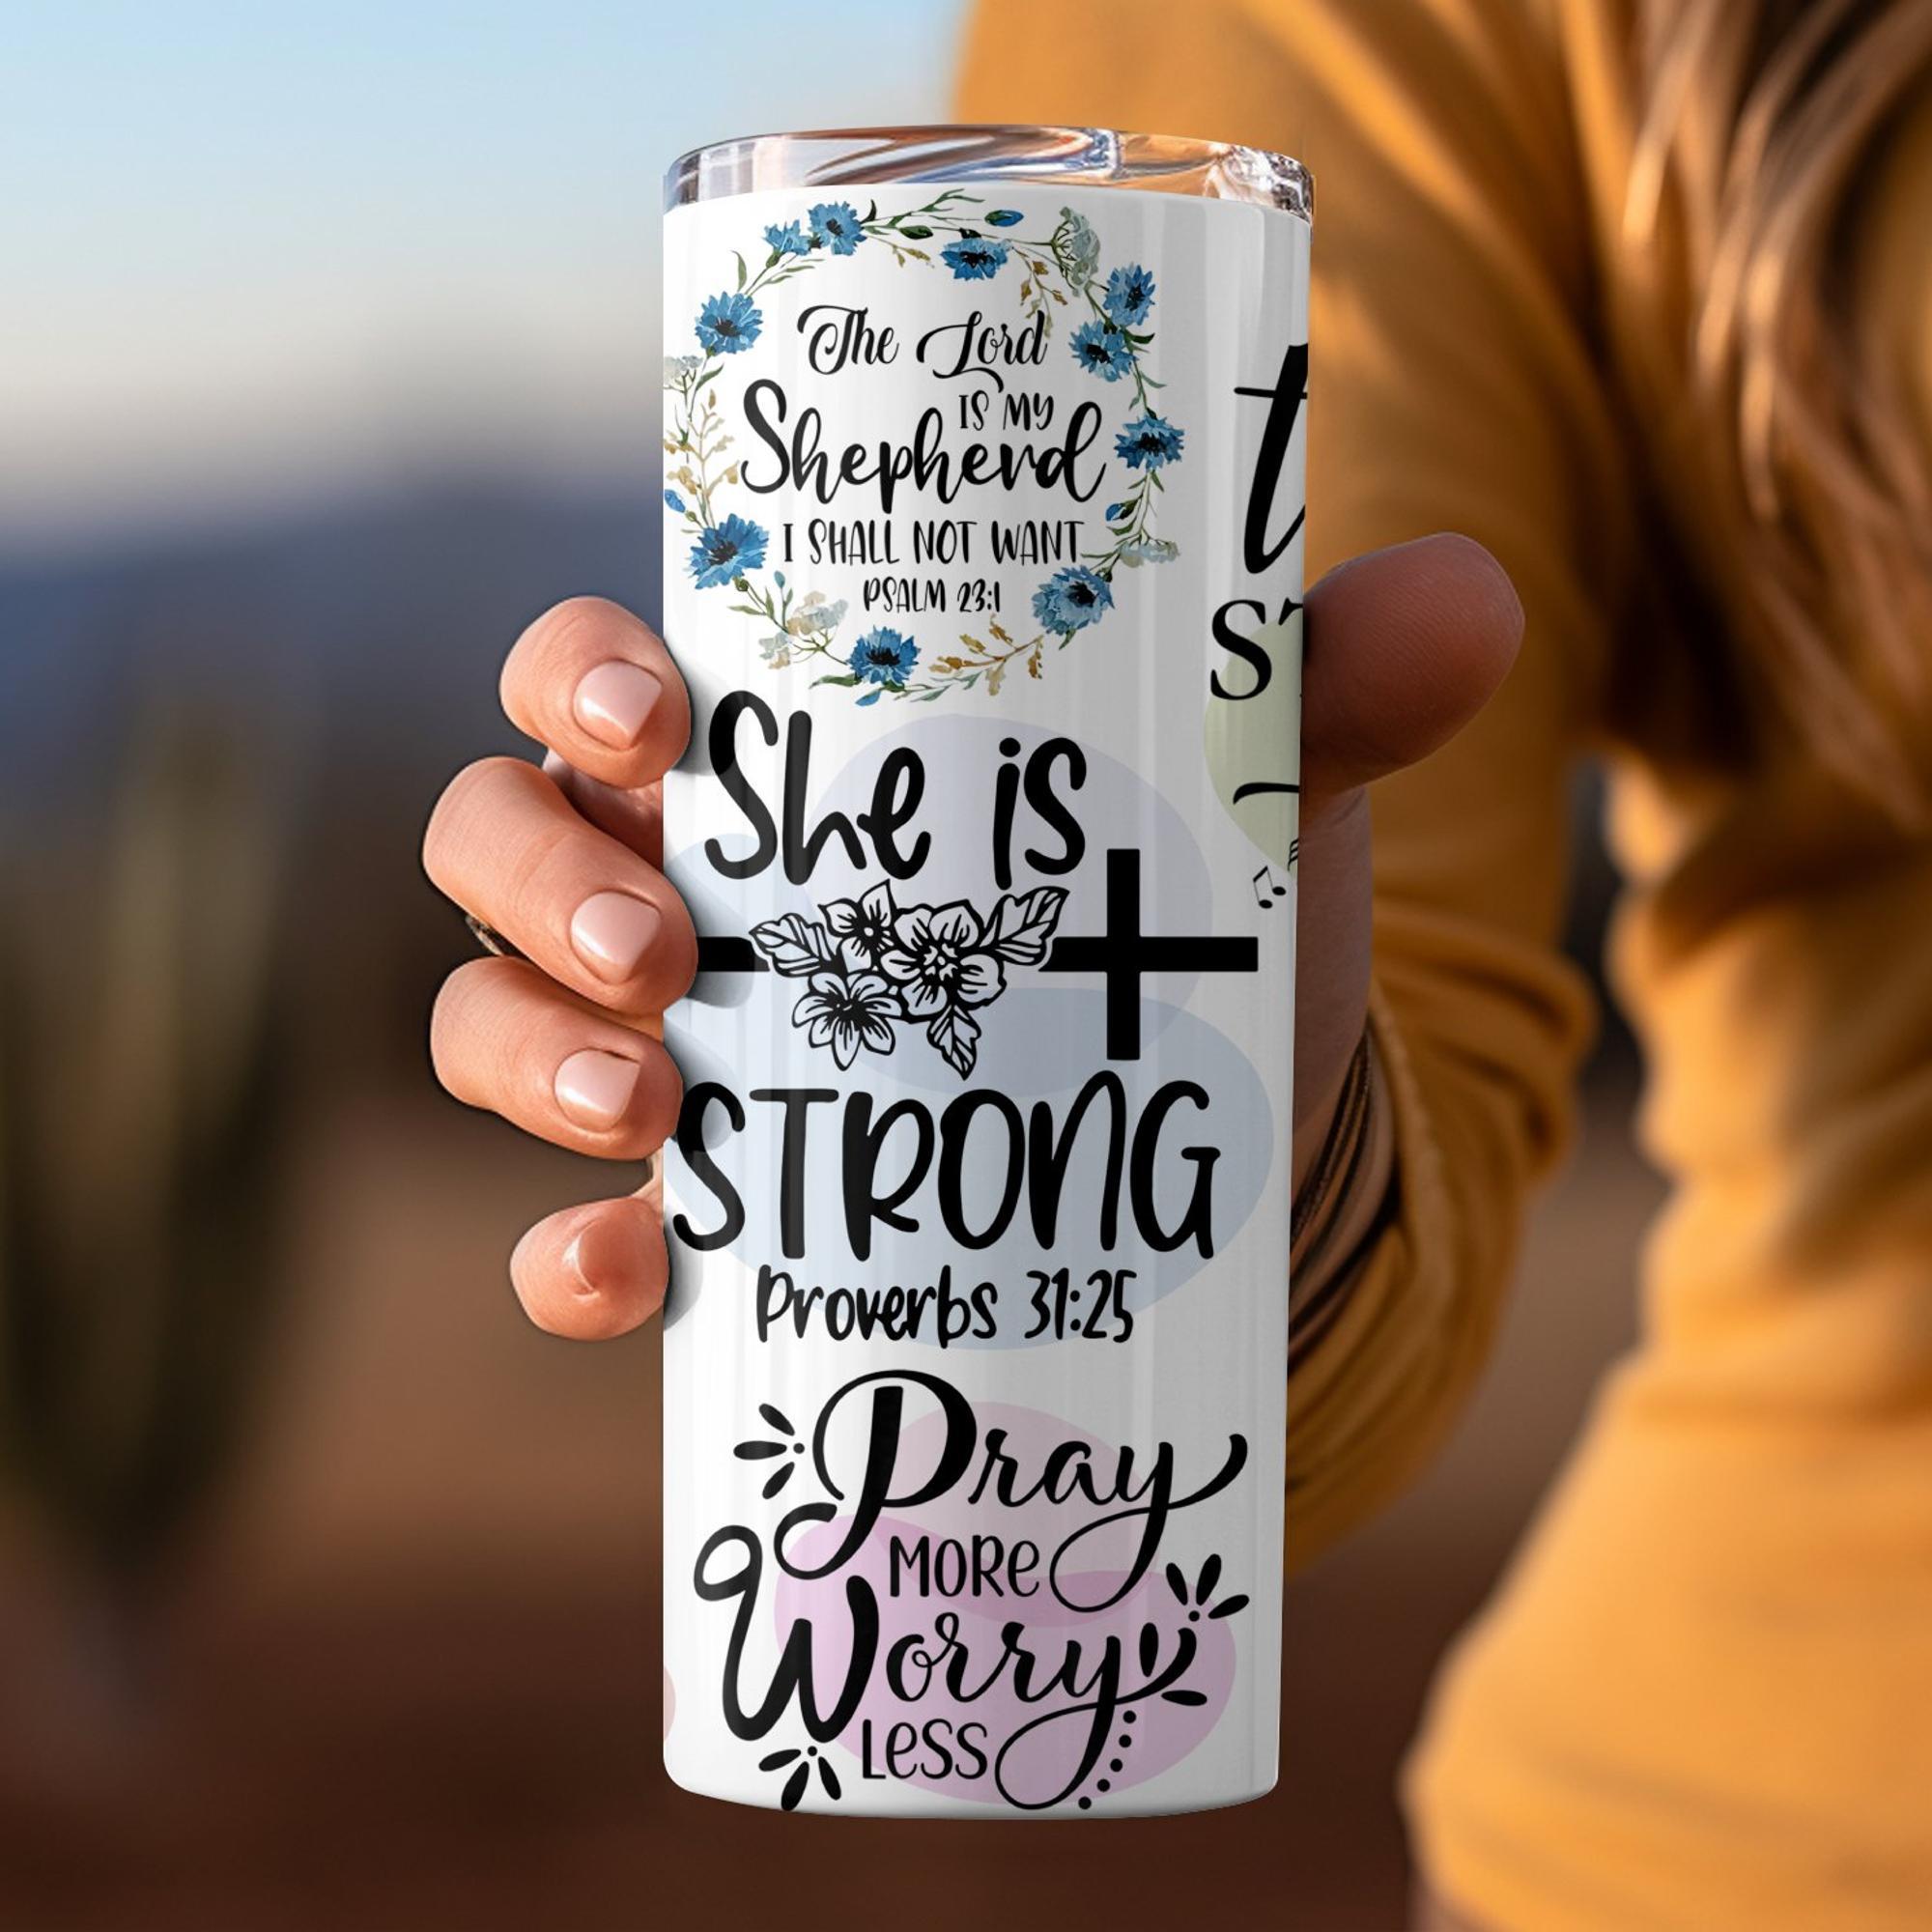 Strong in Christ 20 oz Tumbler with reusable Stainless Steel Straw Size: 20oz Color: White Jesus Passion Apparel